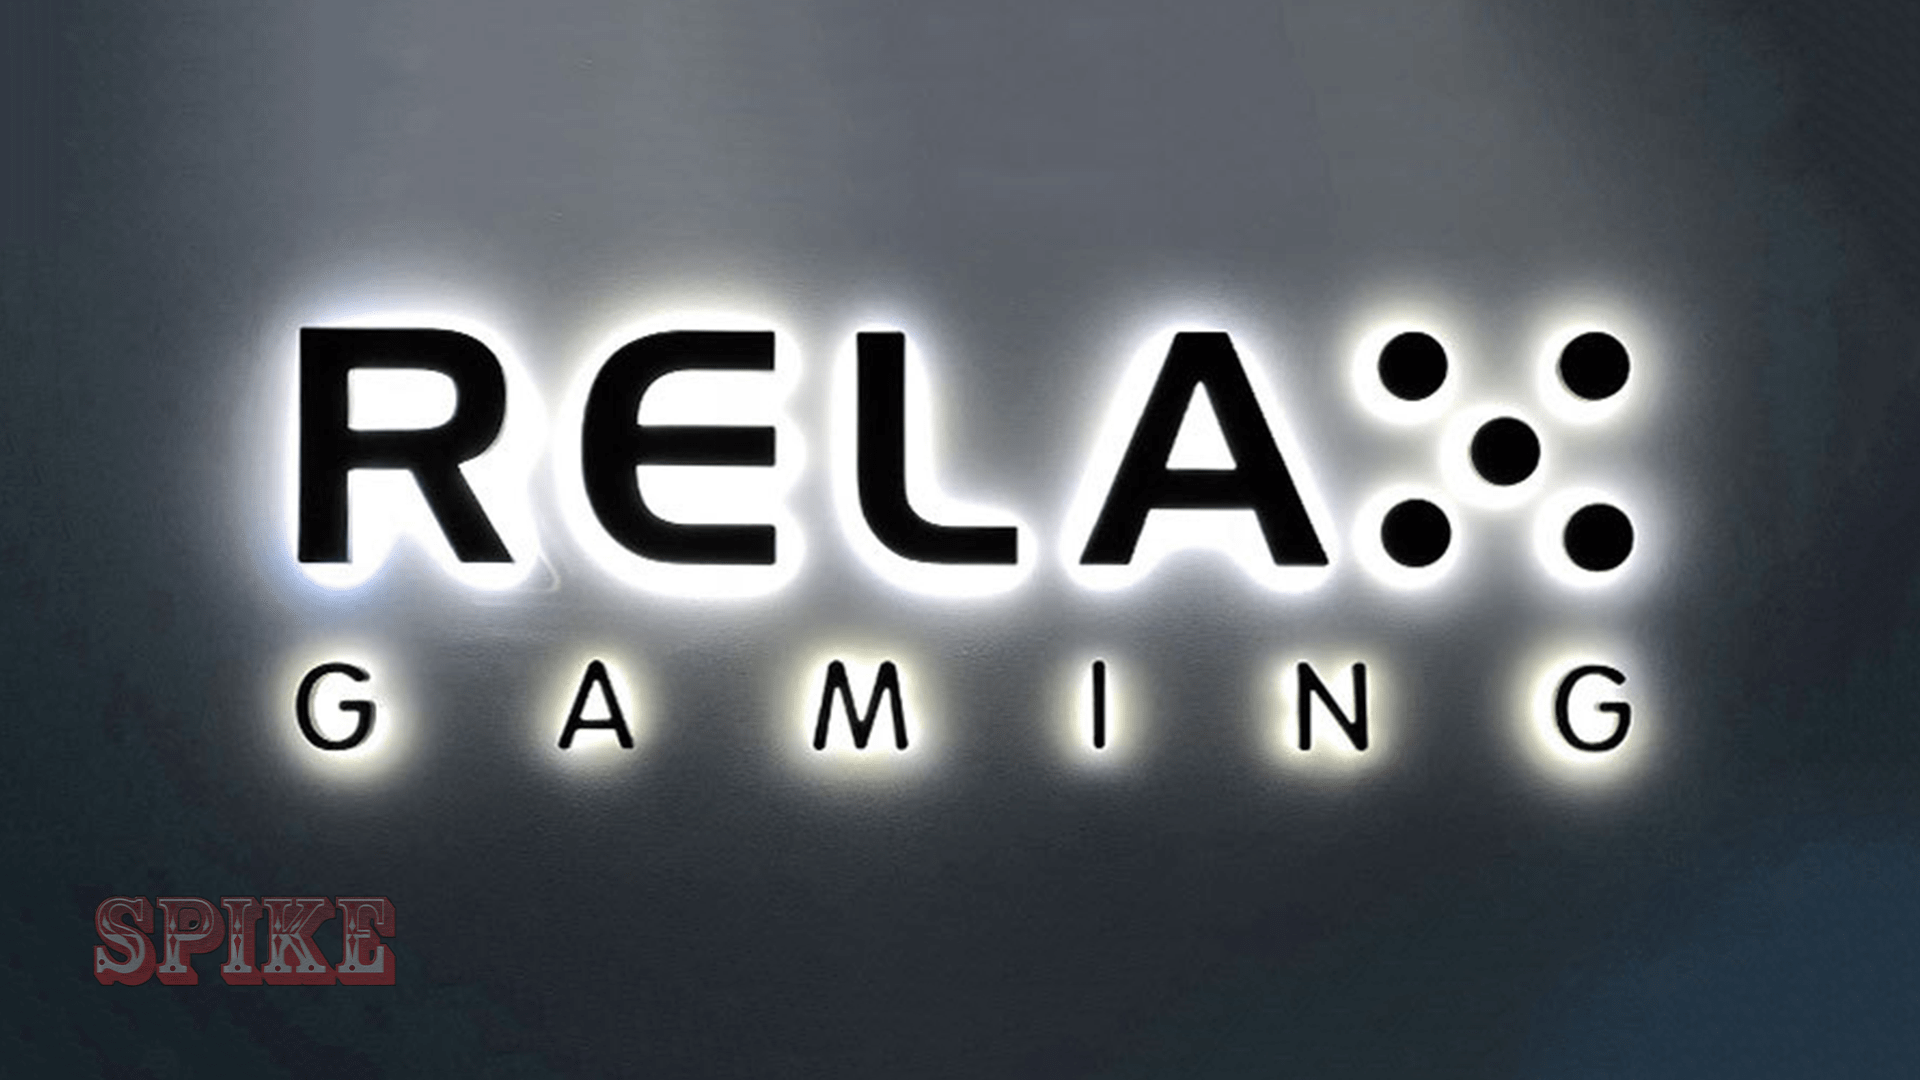 relax gaming slot online free demo